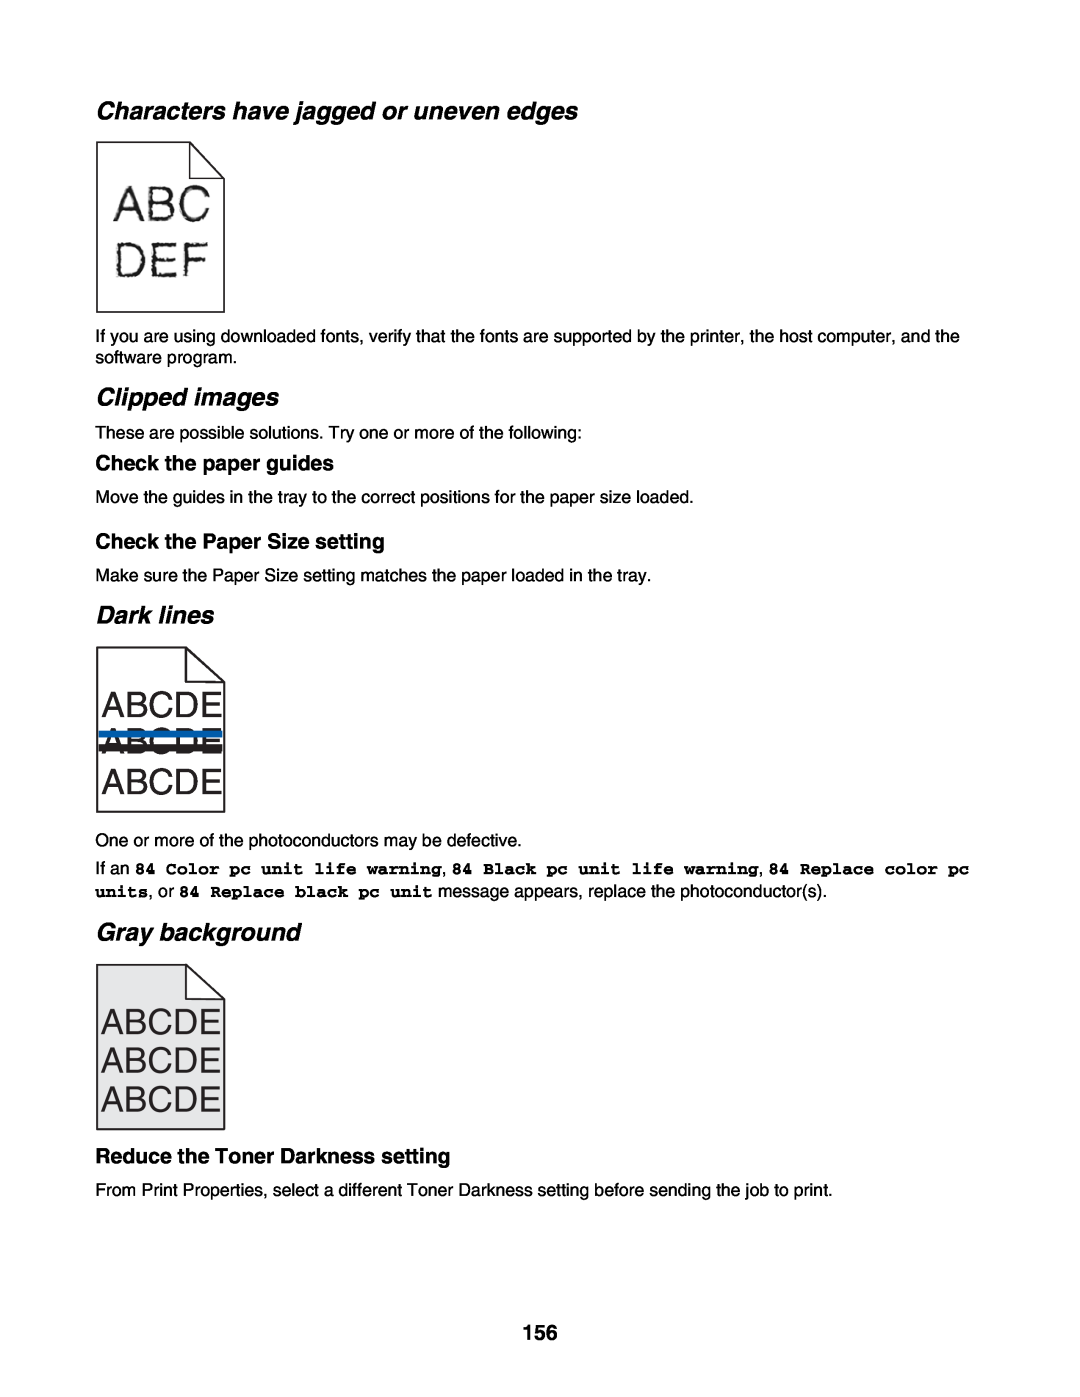 Lexmark C935 manual Characters have jagged or uneven edges, Clipped images, Dark lines, Gray background, Abcde Abcde Abcde 